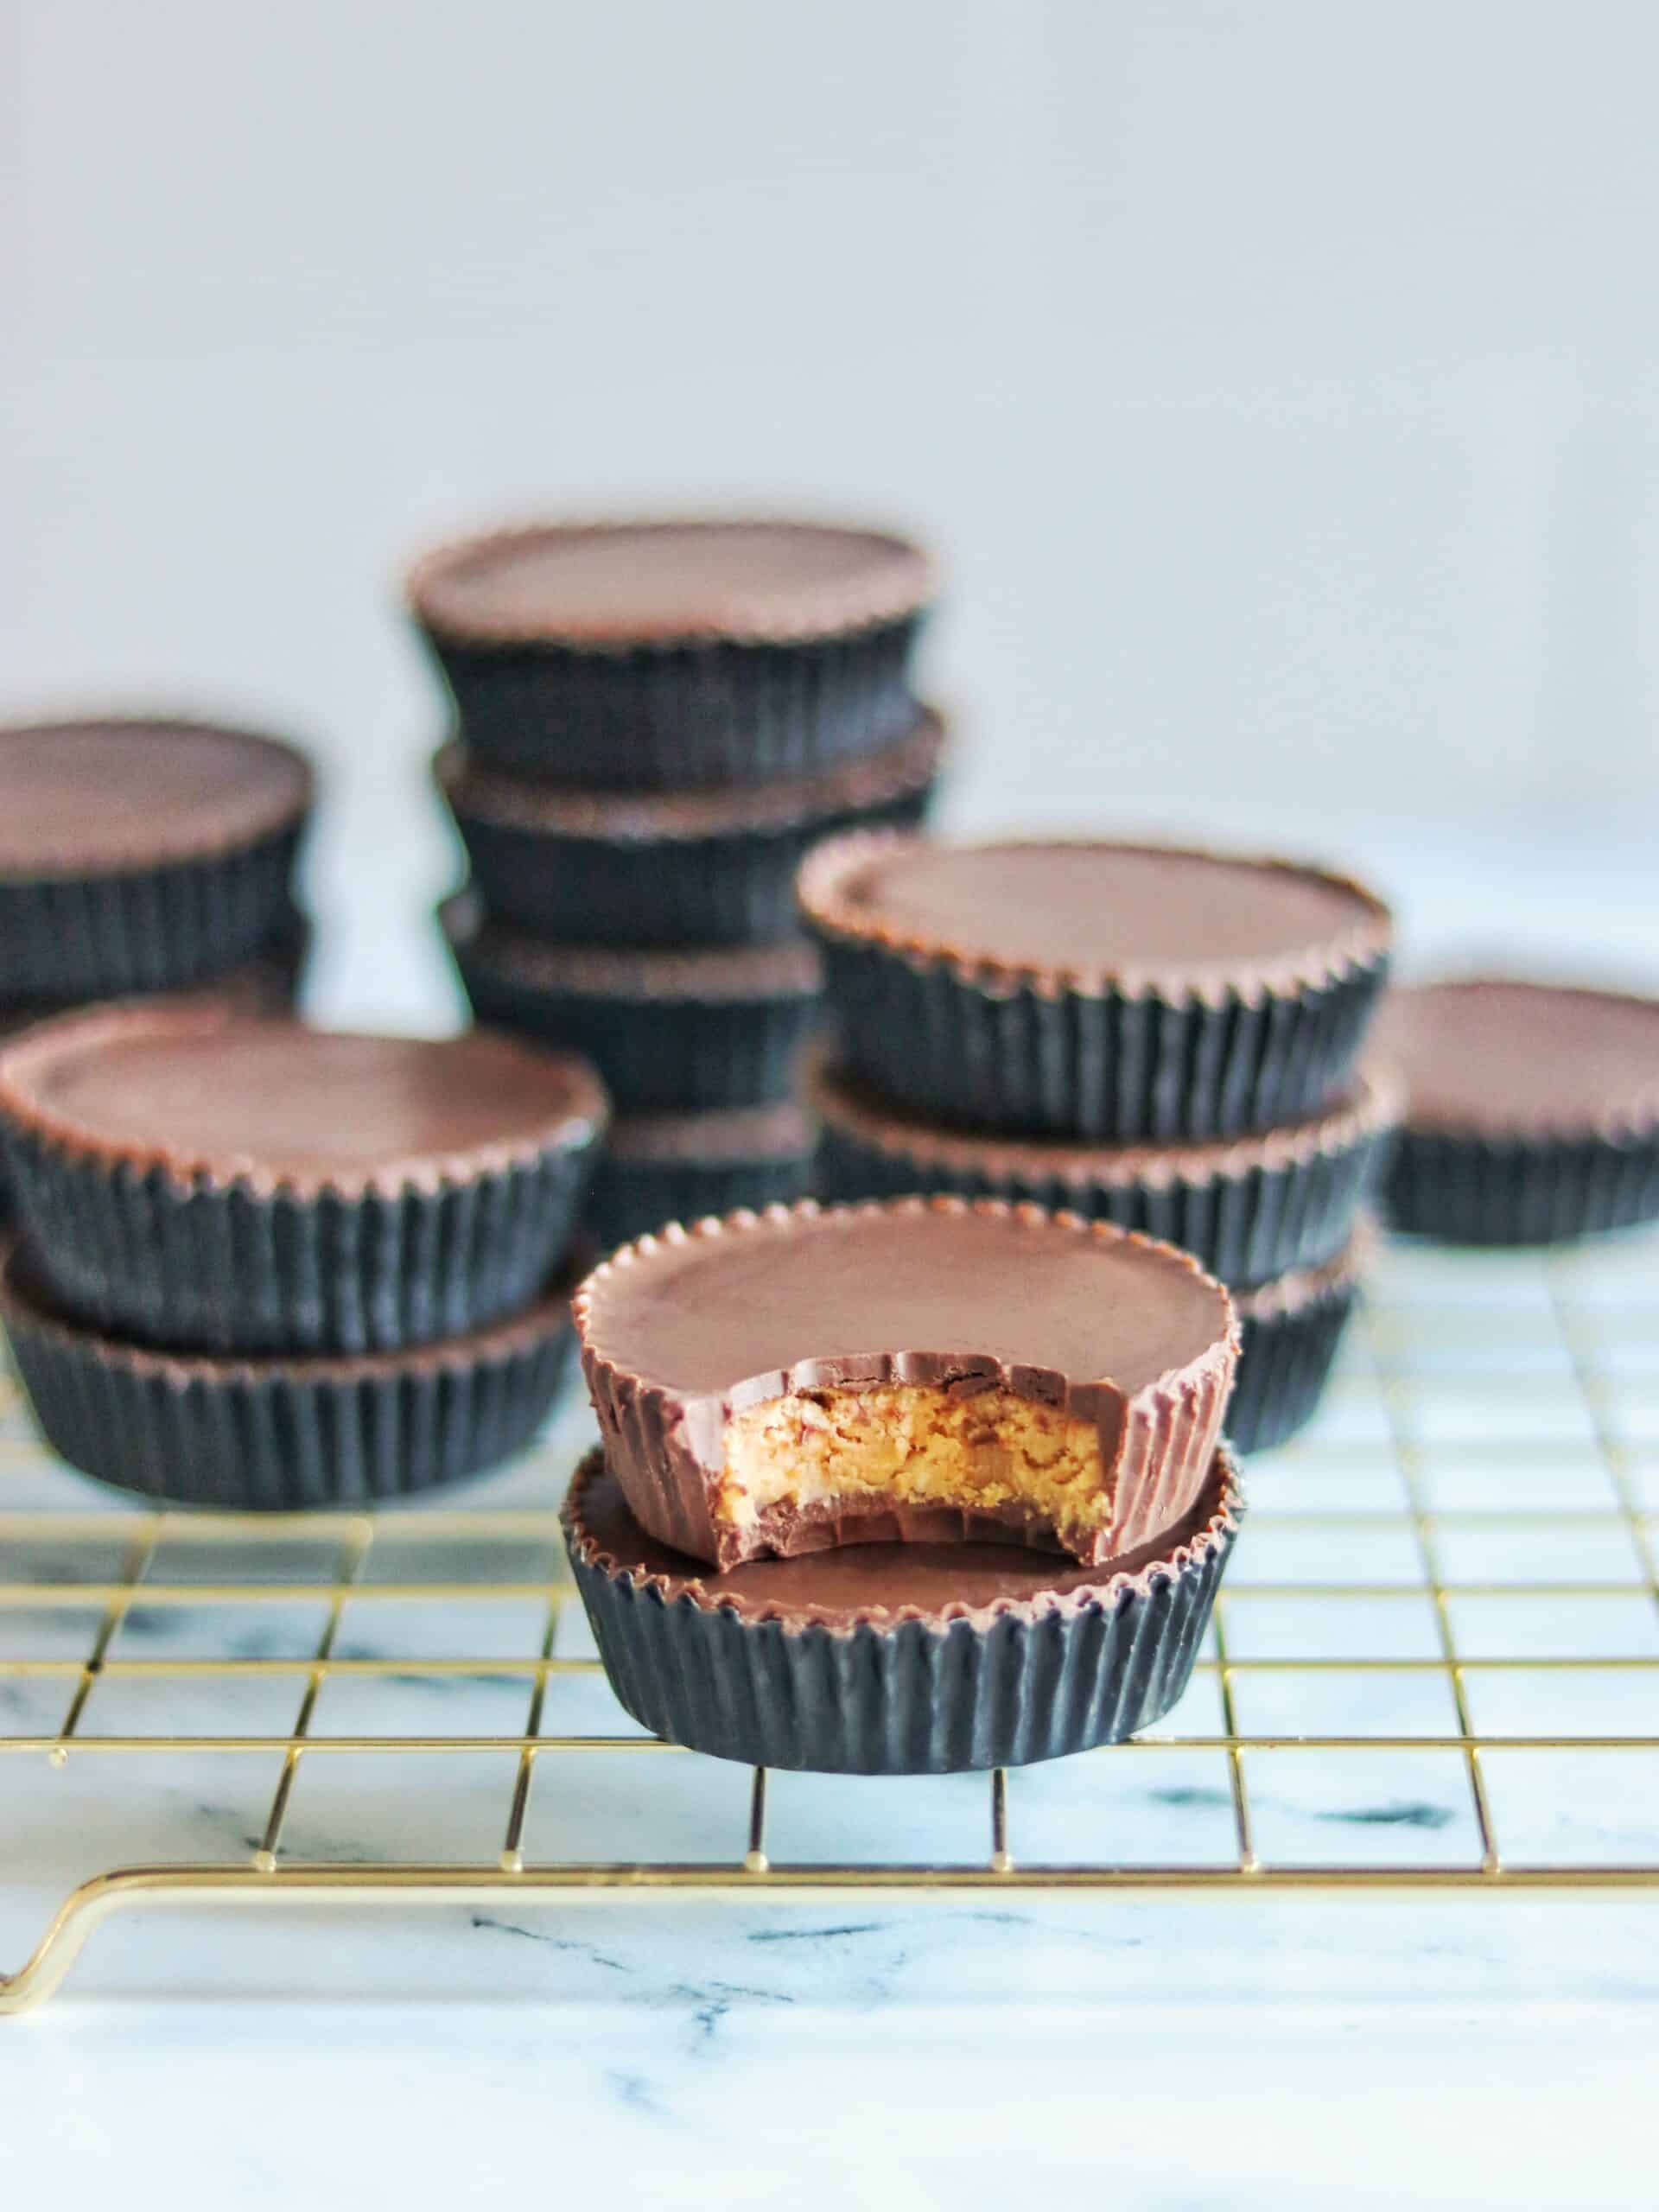 homemade peanut butter cups recipe (homemade Reese's cups)